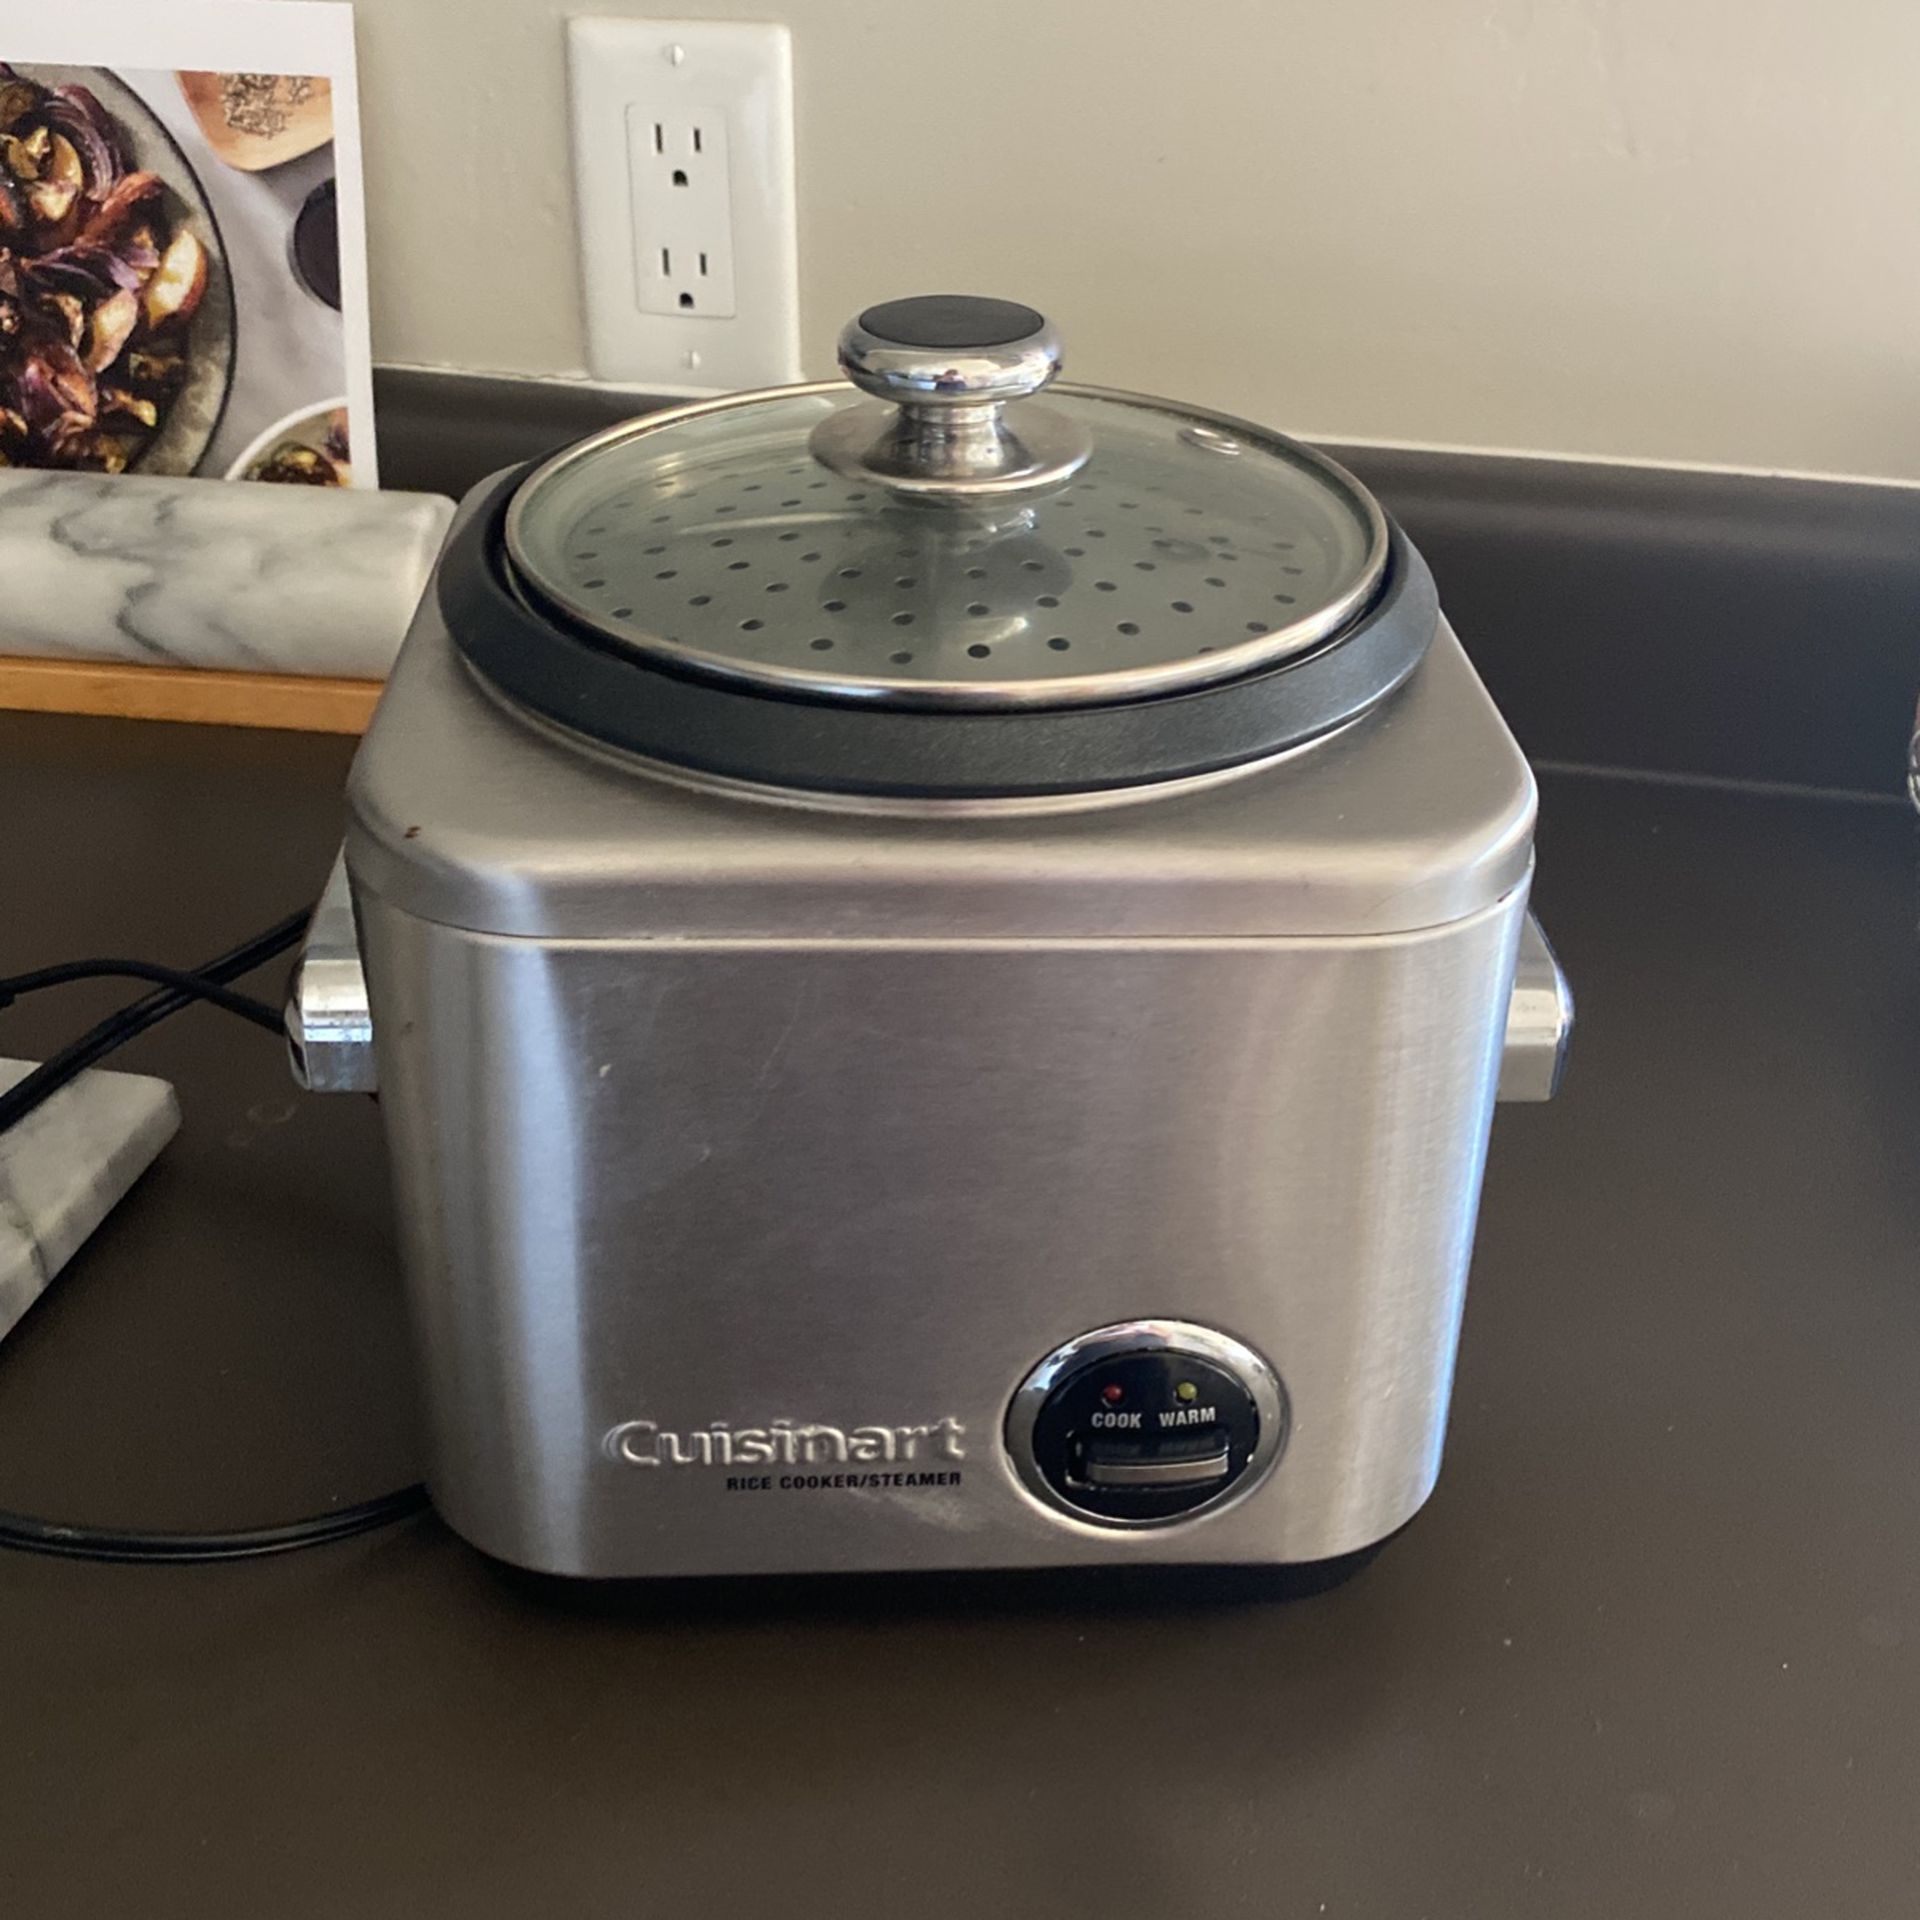 Cuisinart Cook Fresh Steamer for Sale in Poway, CA - OfferUp